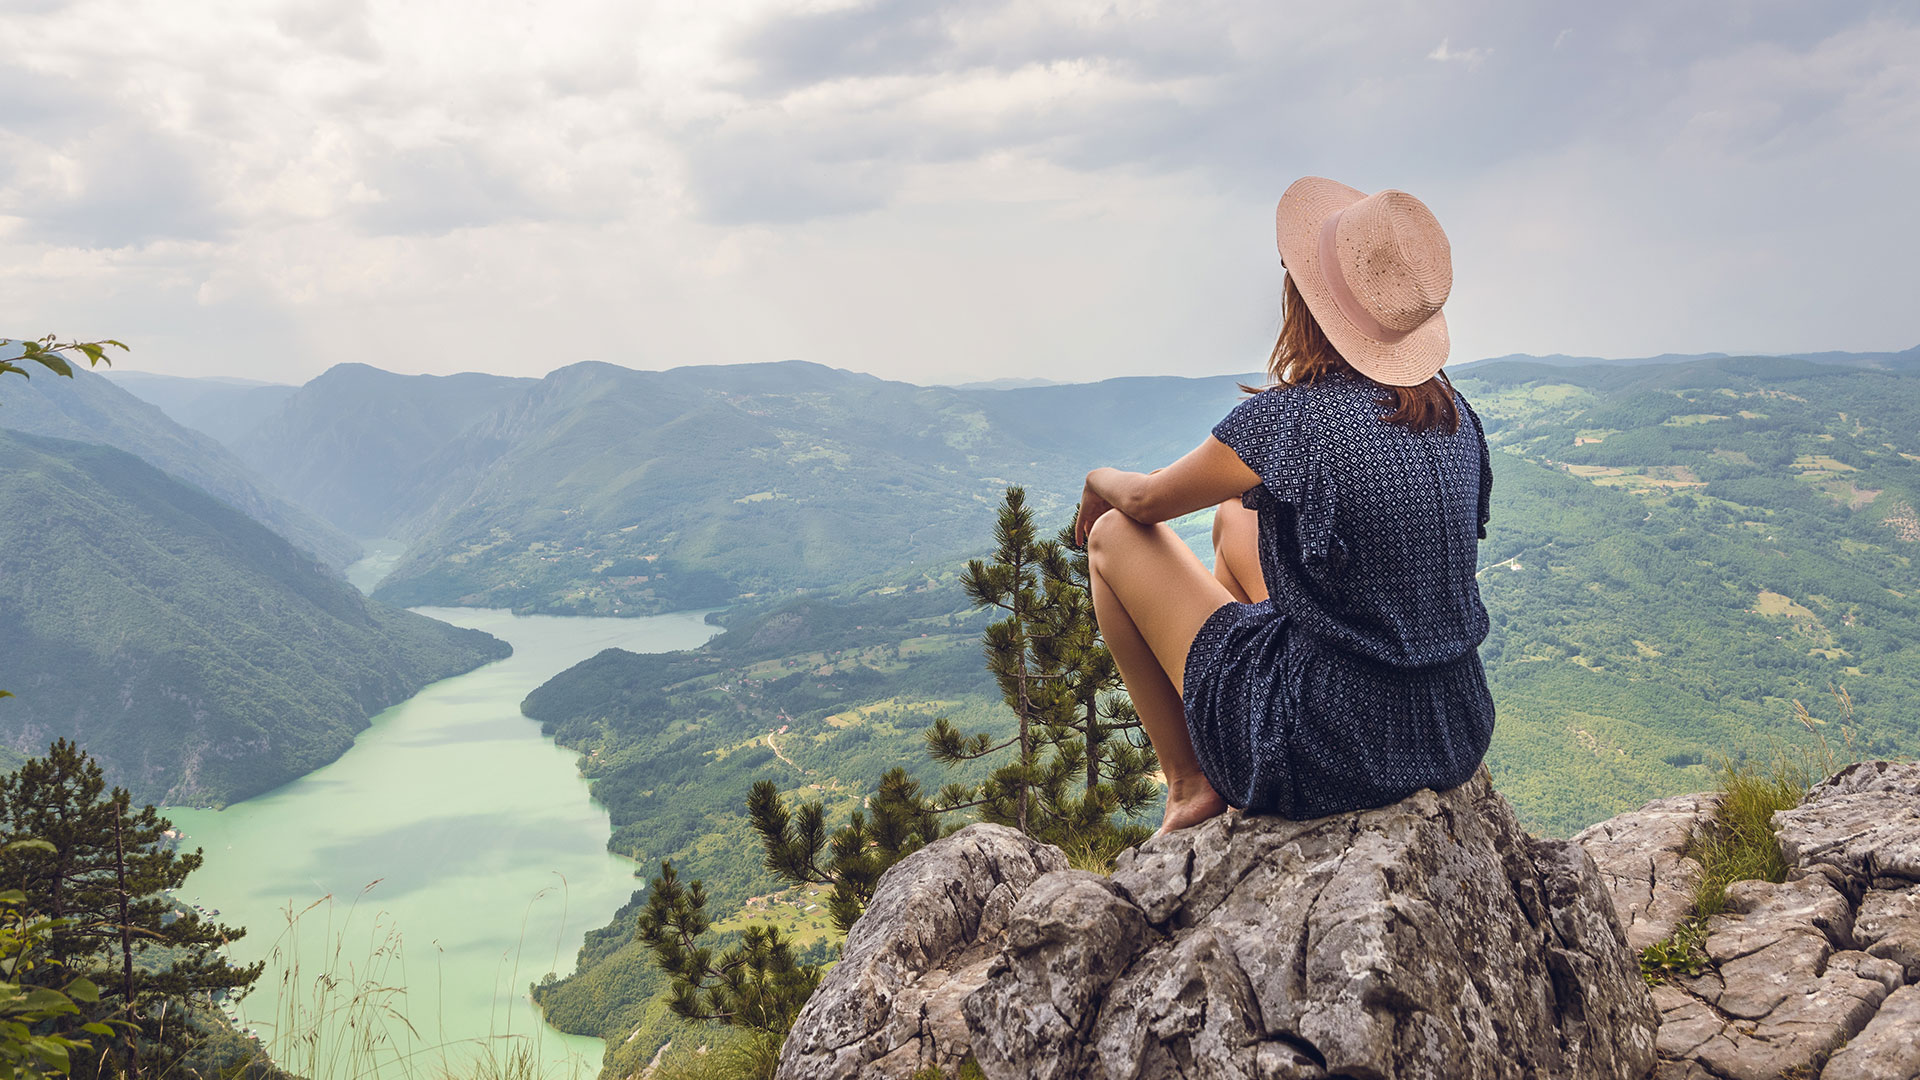 A young woman on a mountain top overlooking a river flowing between the mountains